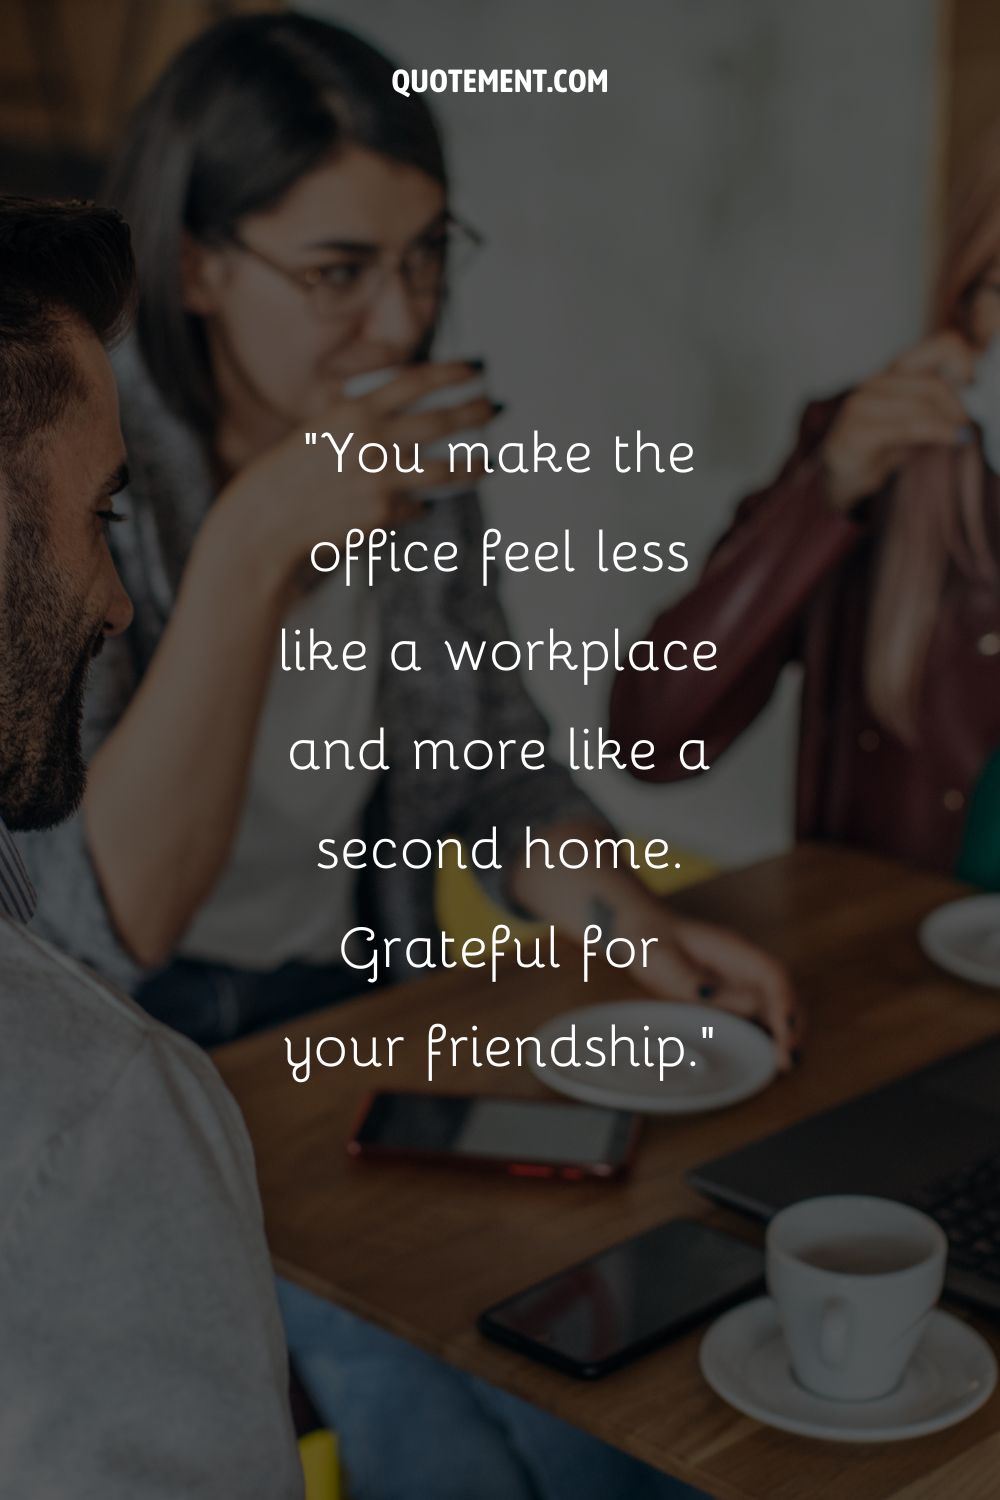 three work friends enjoying coffee on a break representing office friends quote
